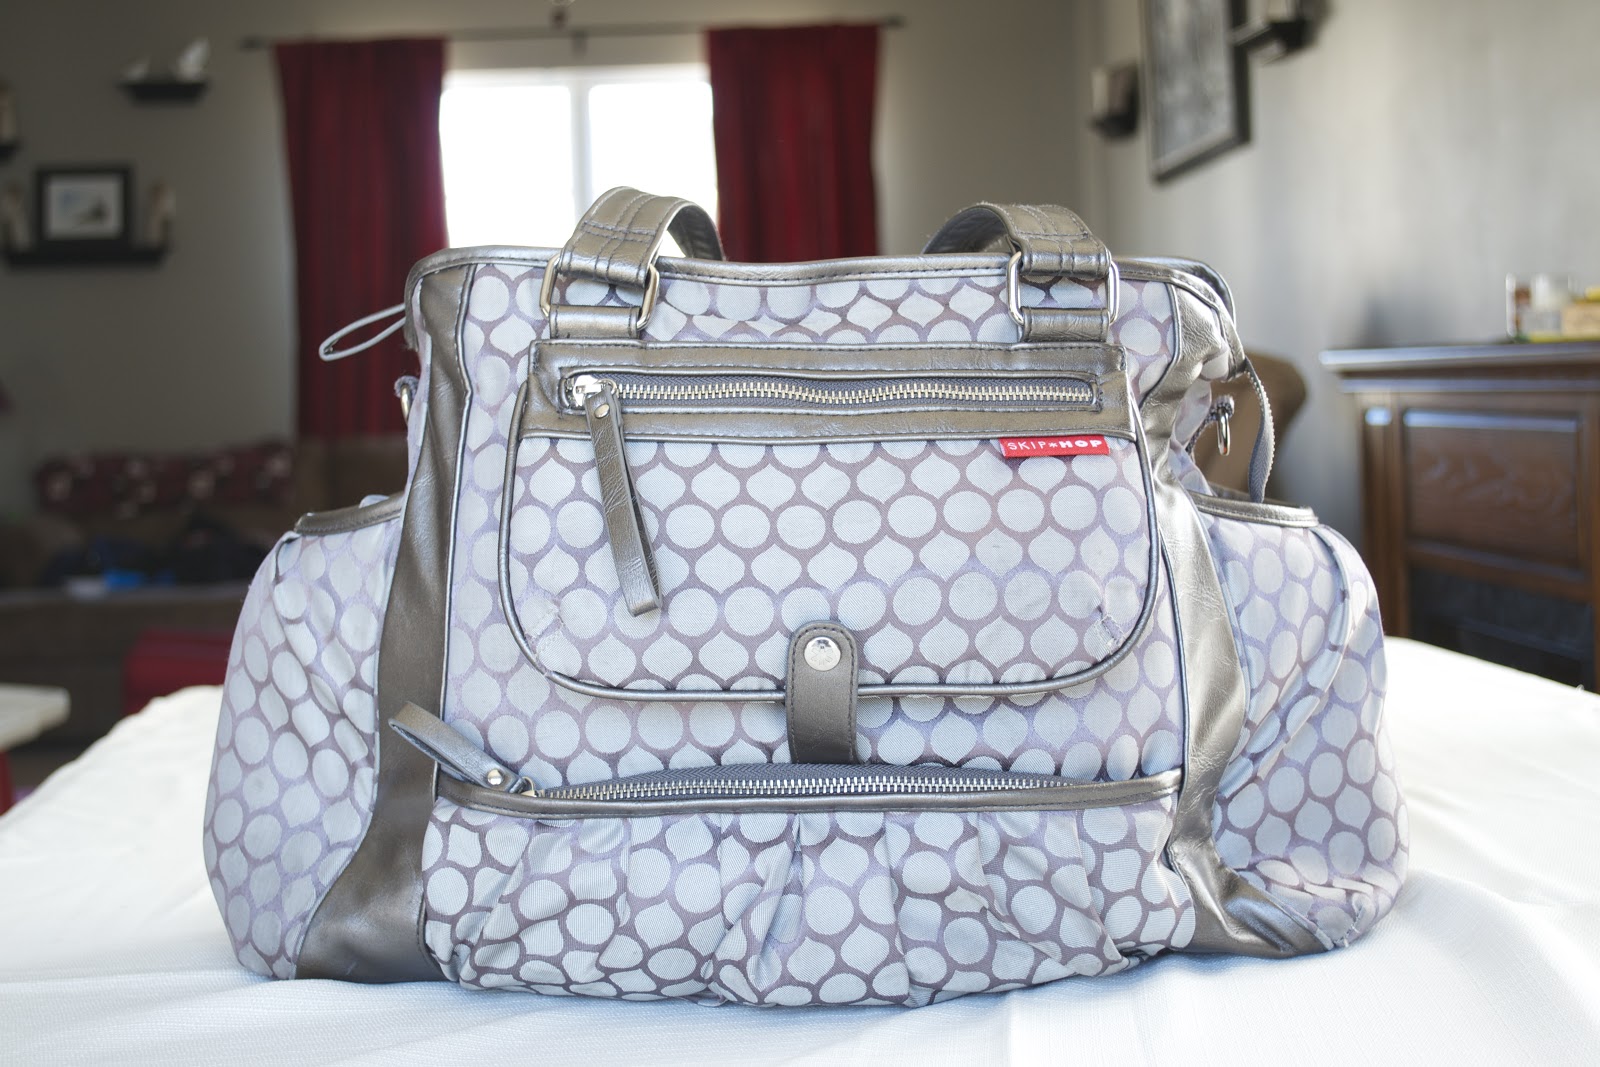 diaper bags extra large - Home design